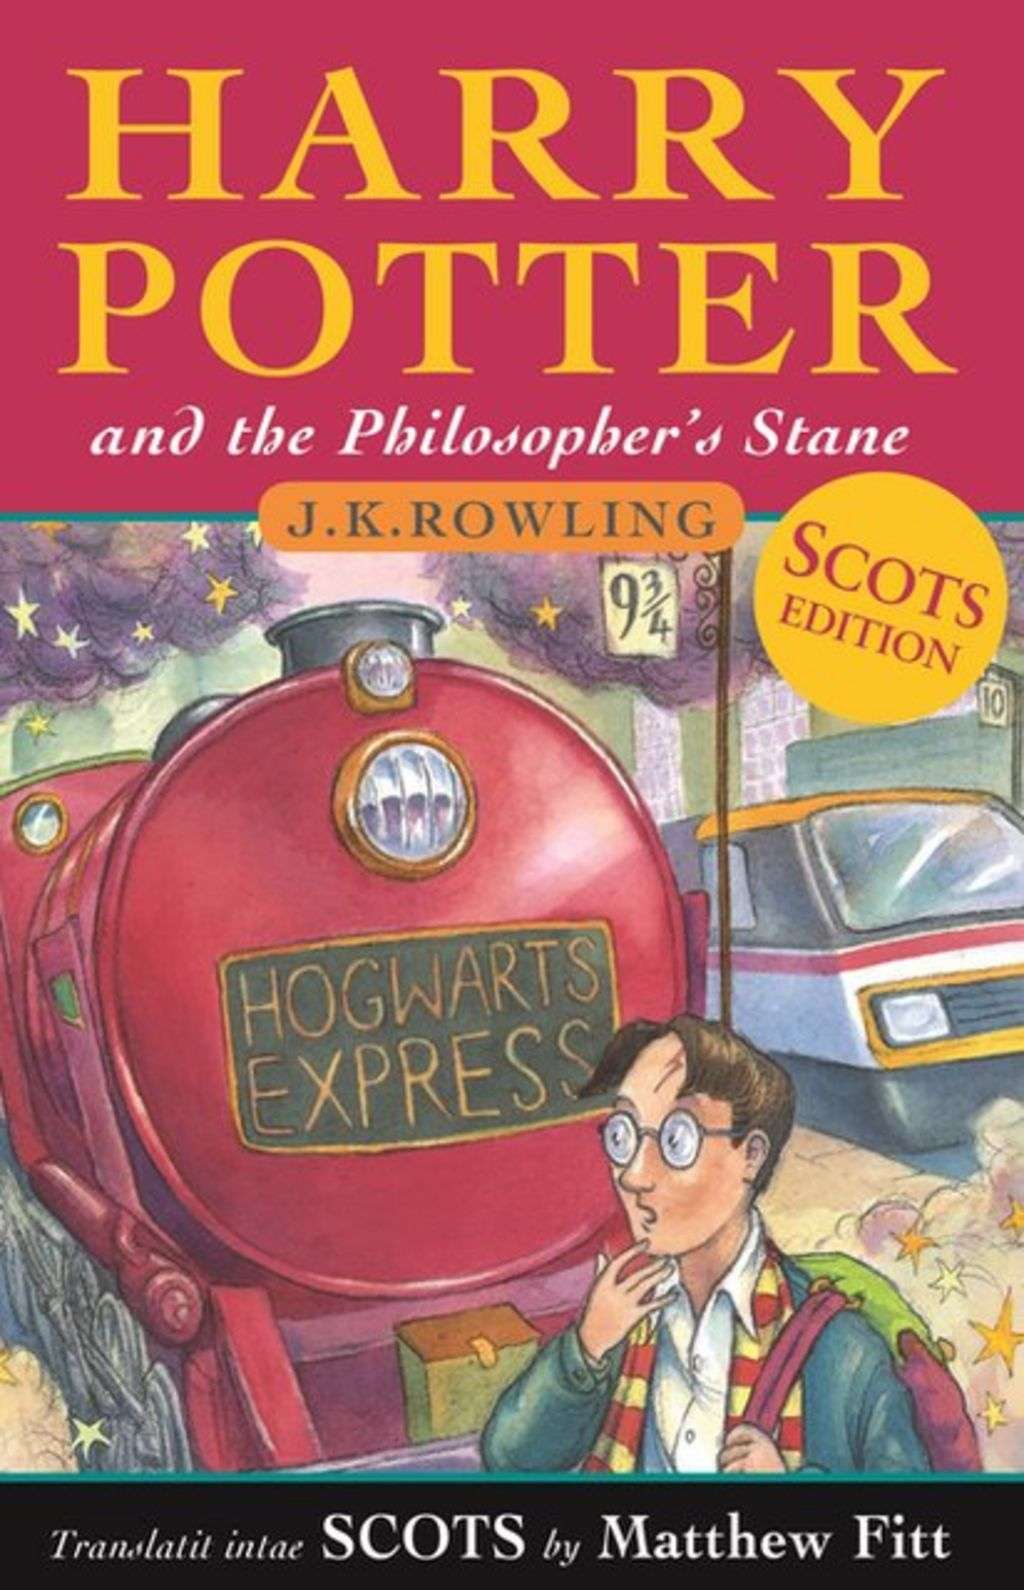 First book in Harry Potter series translated into Scots ...